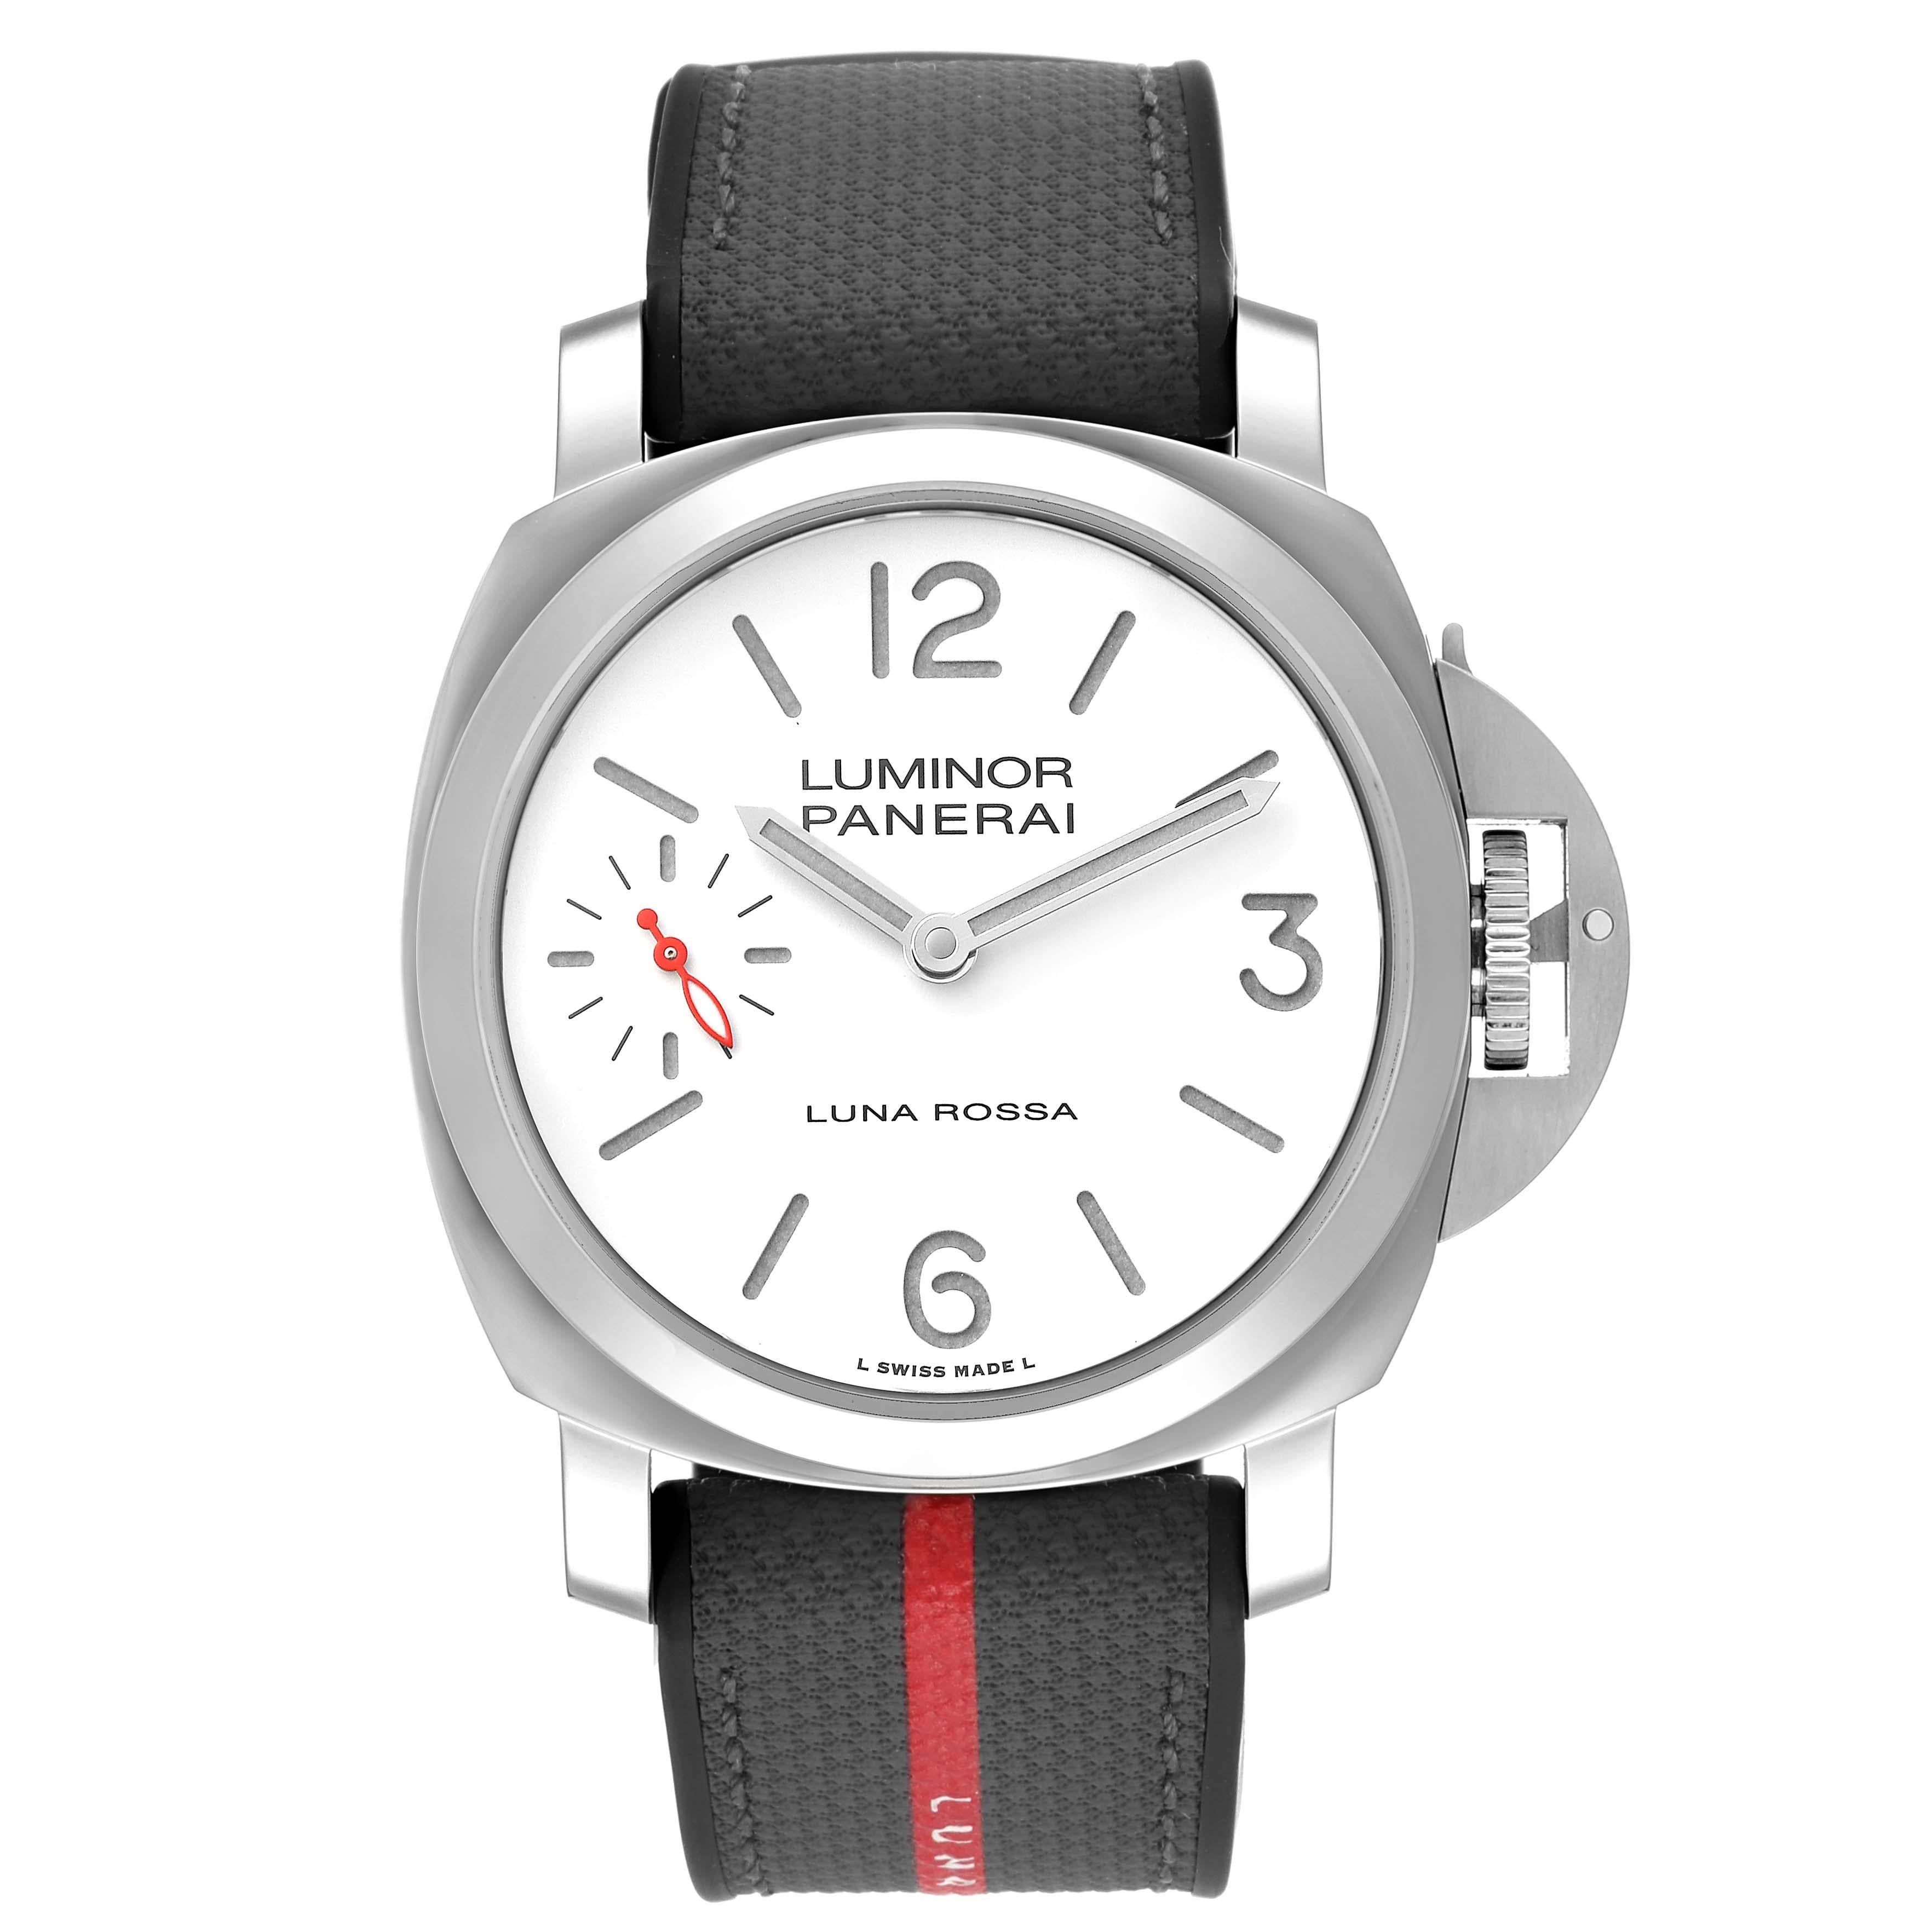 Panerai Luminor Luna Rossa 44mm White Dial Mens Watch PAM01342 Unworn. Manual-winding movement. Two part cushion shaped stainless steel case 44 mm in diameter.  Panerai patented crown protector. Polished stainless steel sloped bezel. Scratch